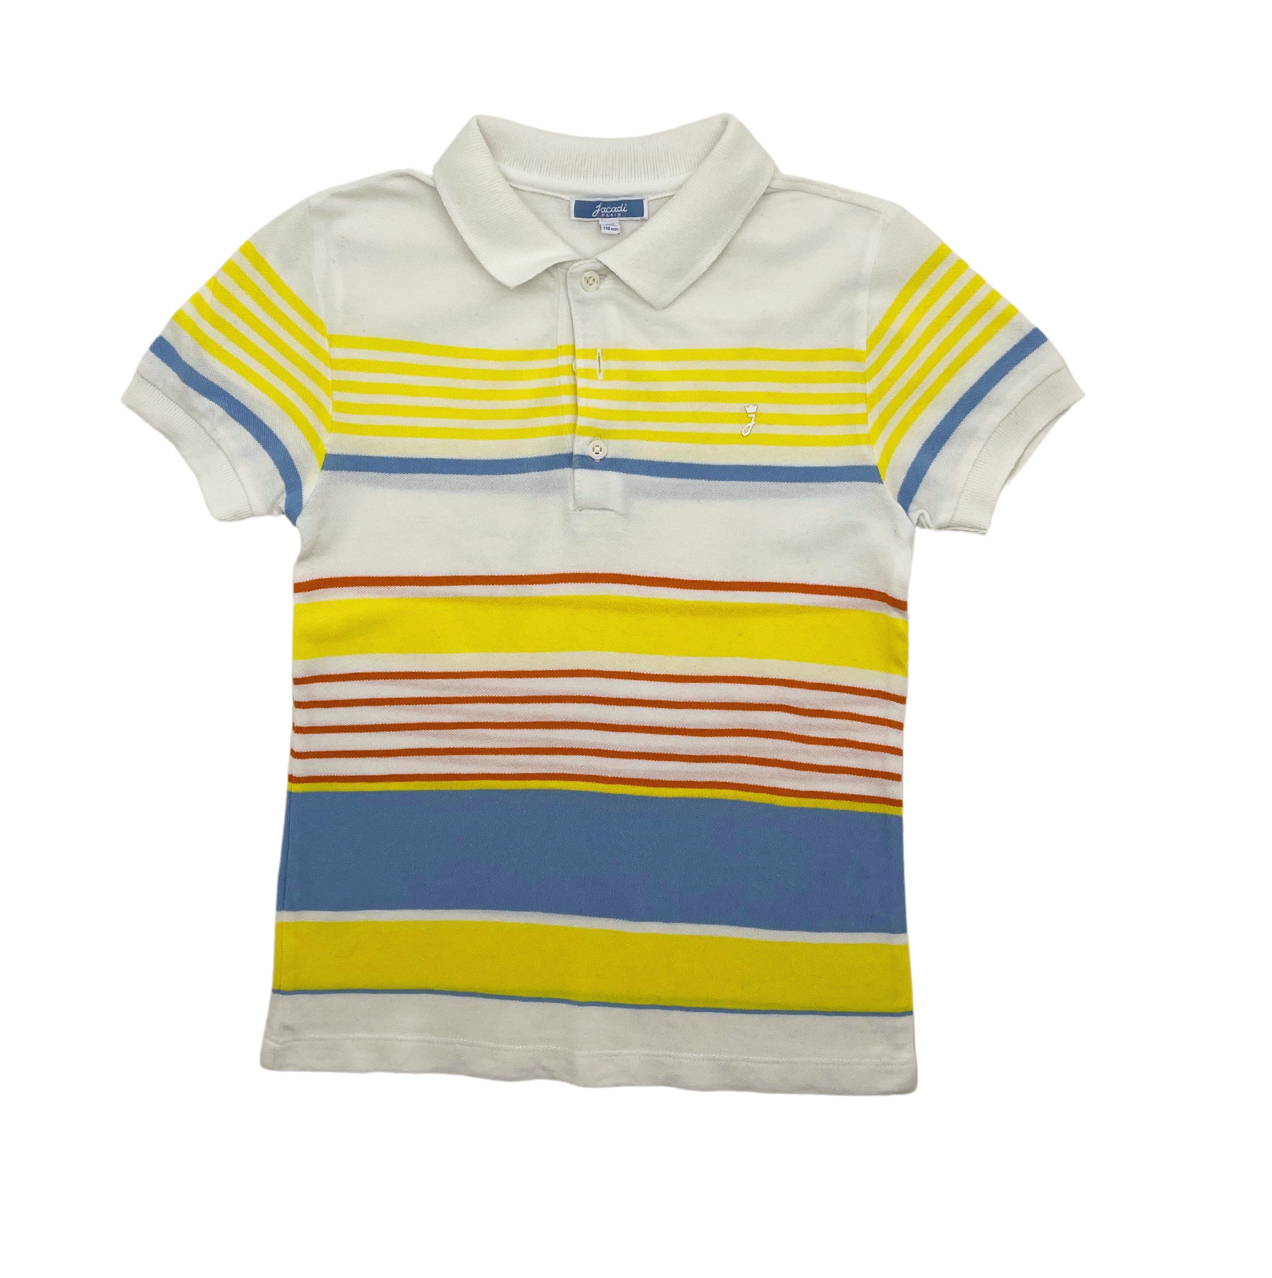 JACADI - Polo shirt with multicolored stripes - 6 years old